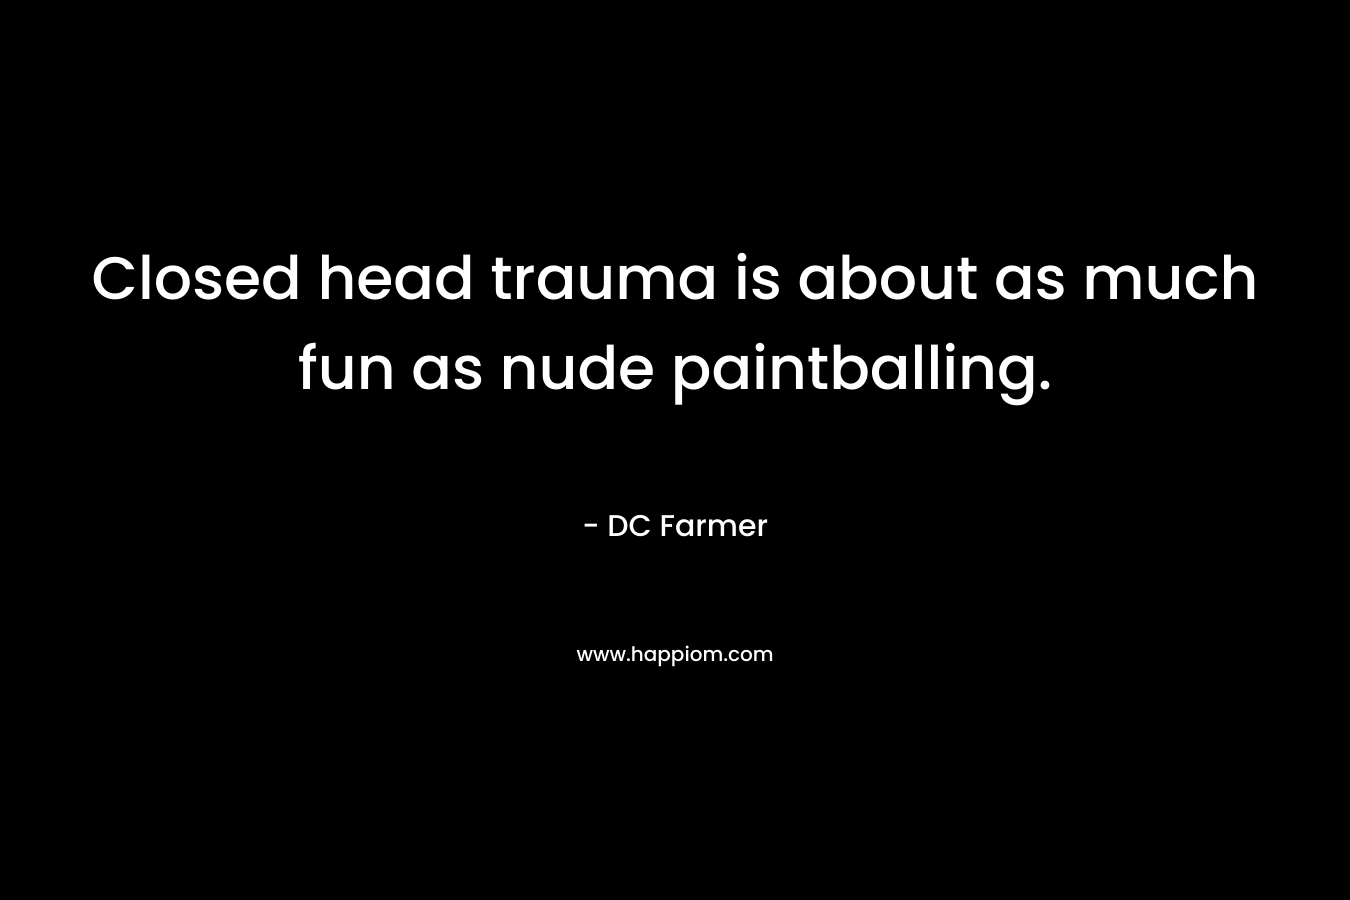 Closed head trauma is about as much fun as nude paintballing. – DC Farmer